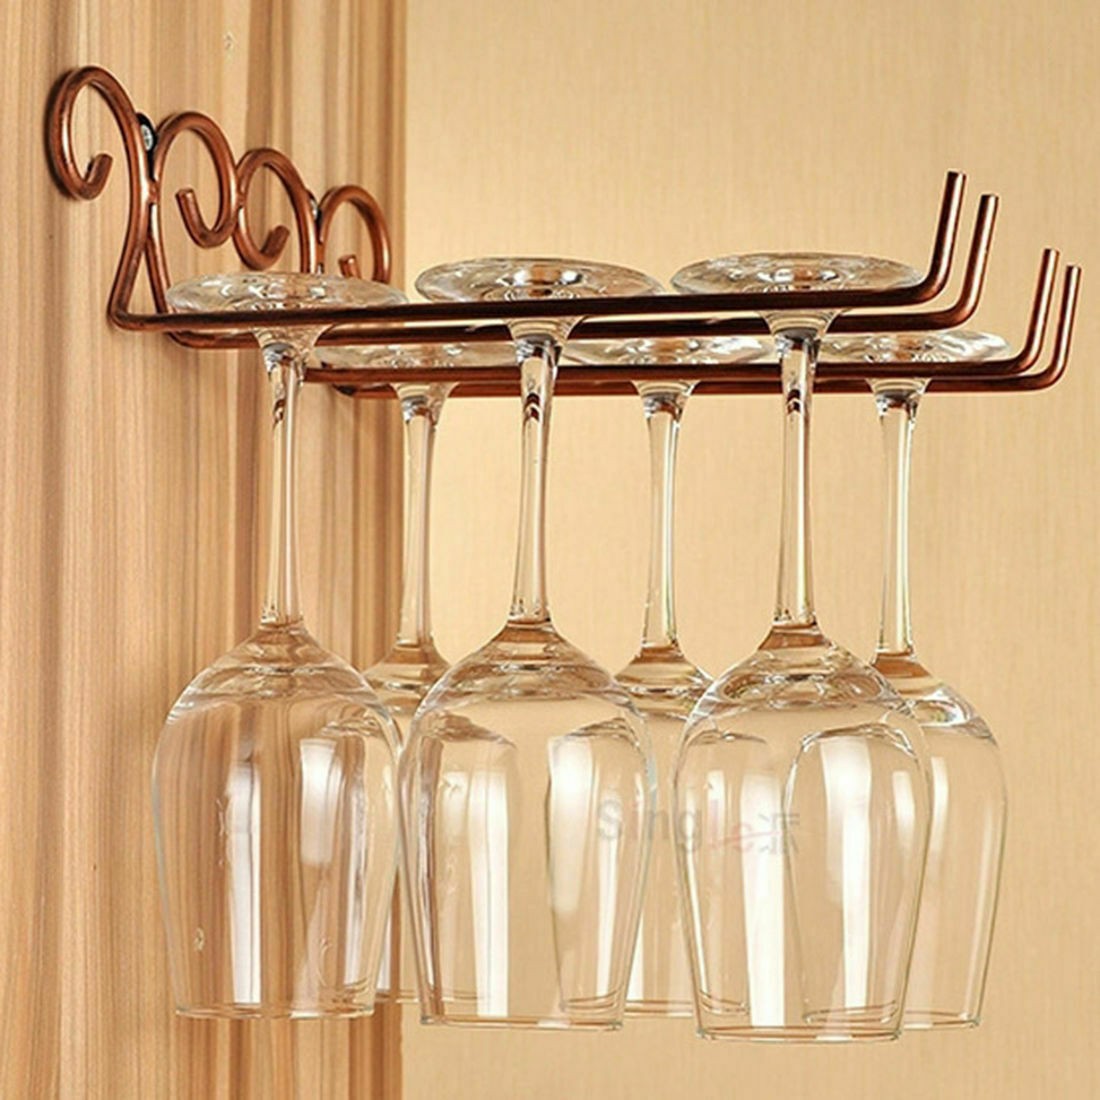 2 rows glass hanger wall mounted wine glass storage rack